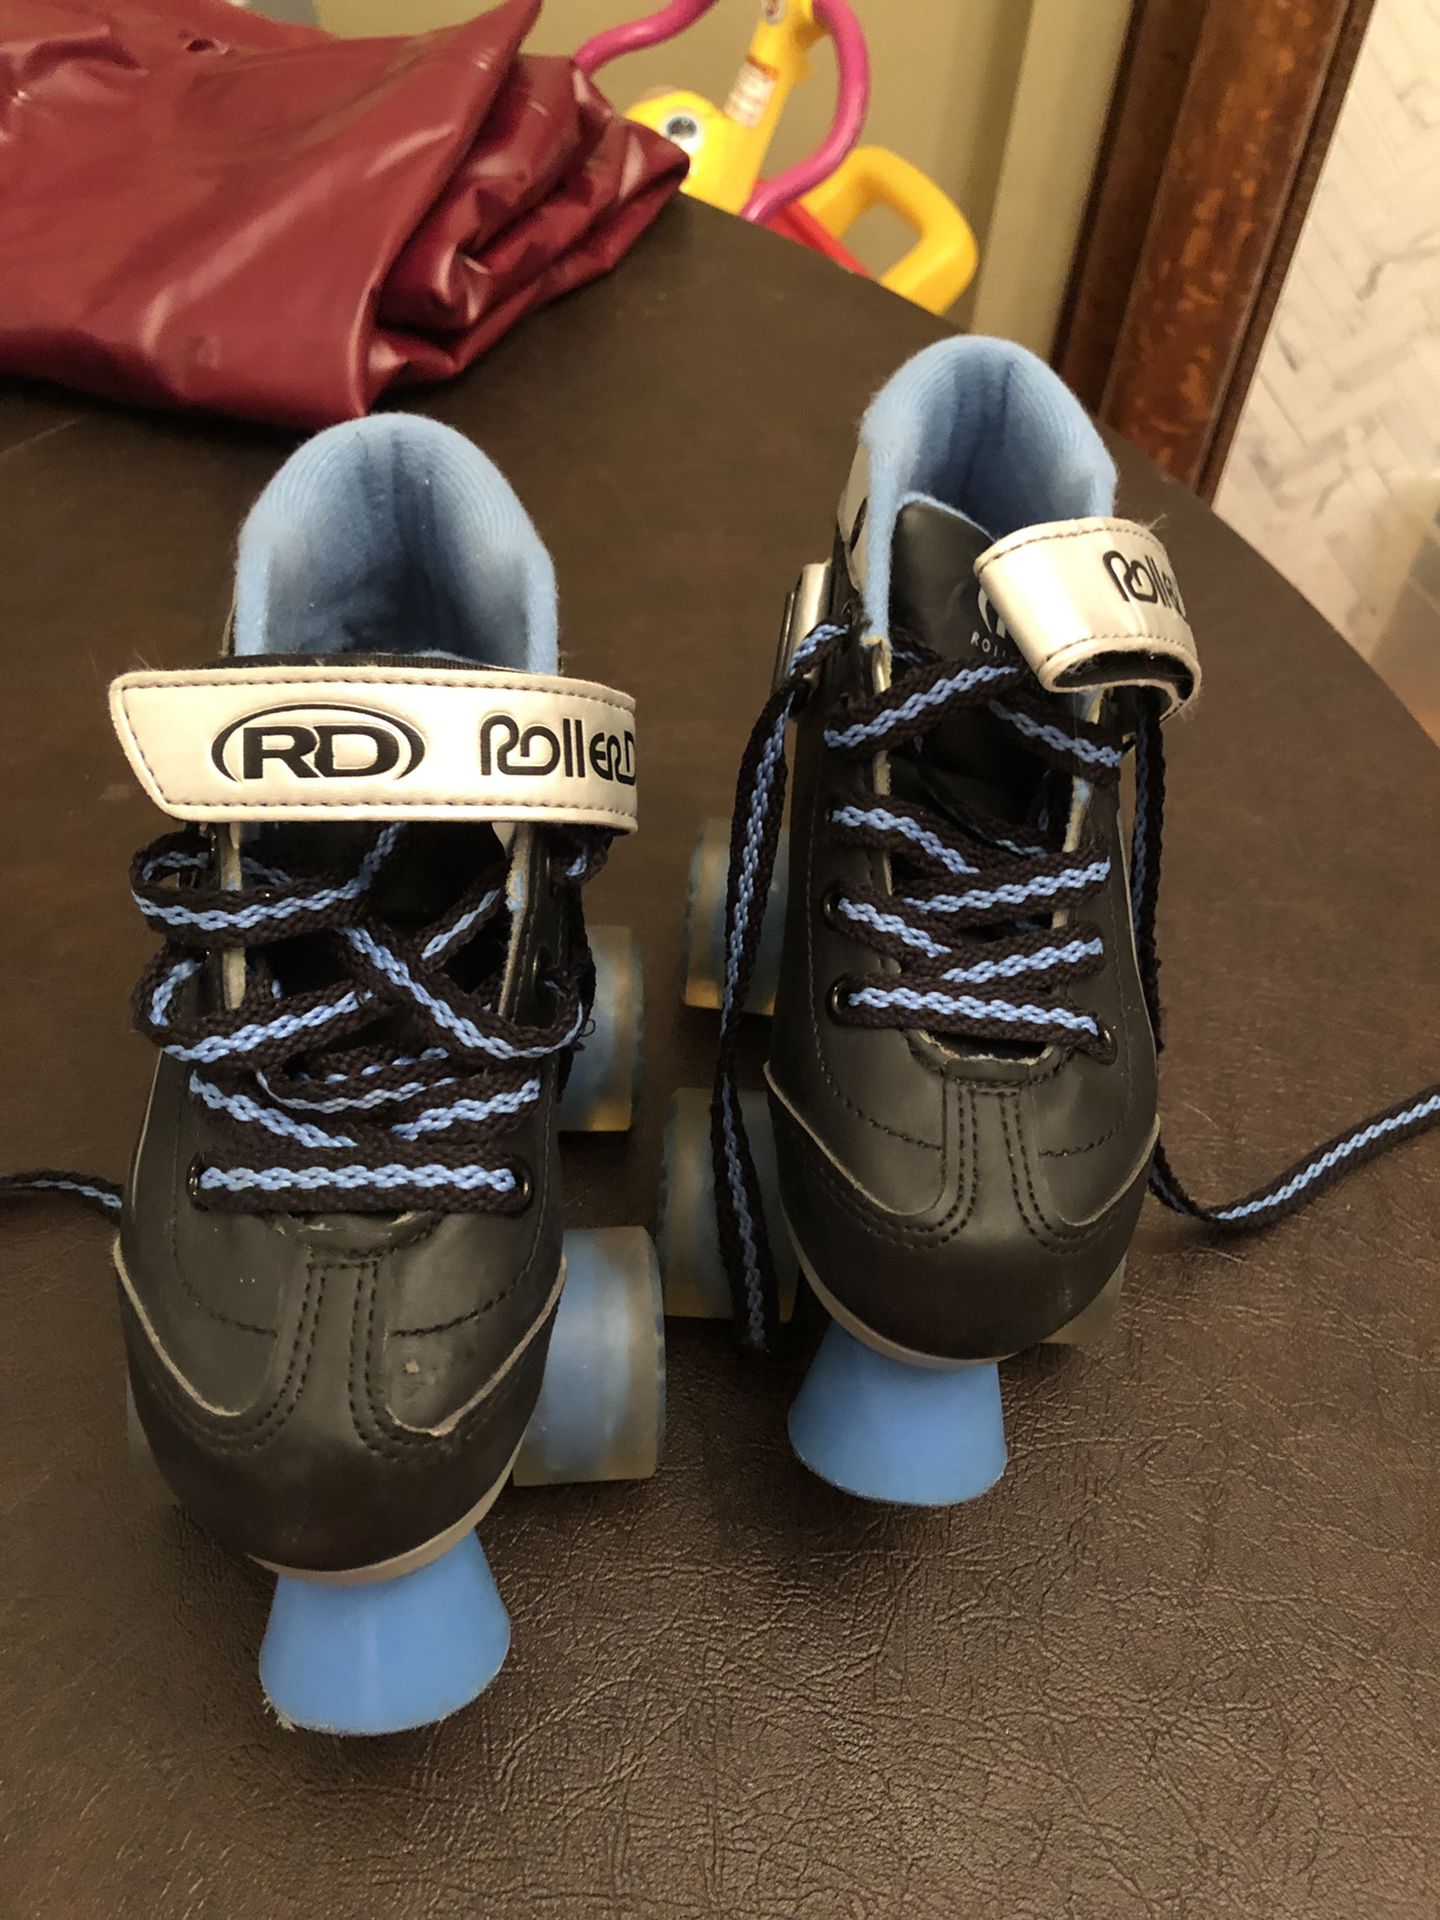 Roller Derby Roller Skates, kid size 13. We have wrist and elbow guards too.